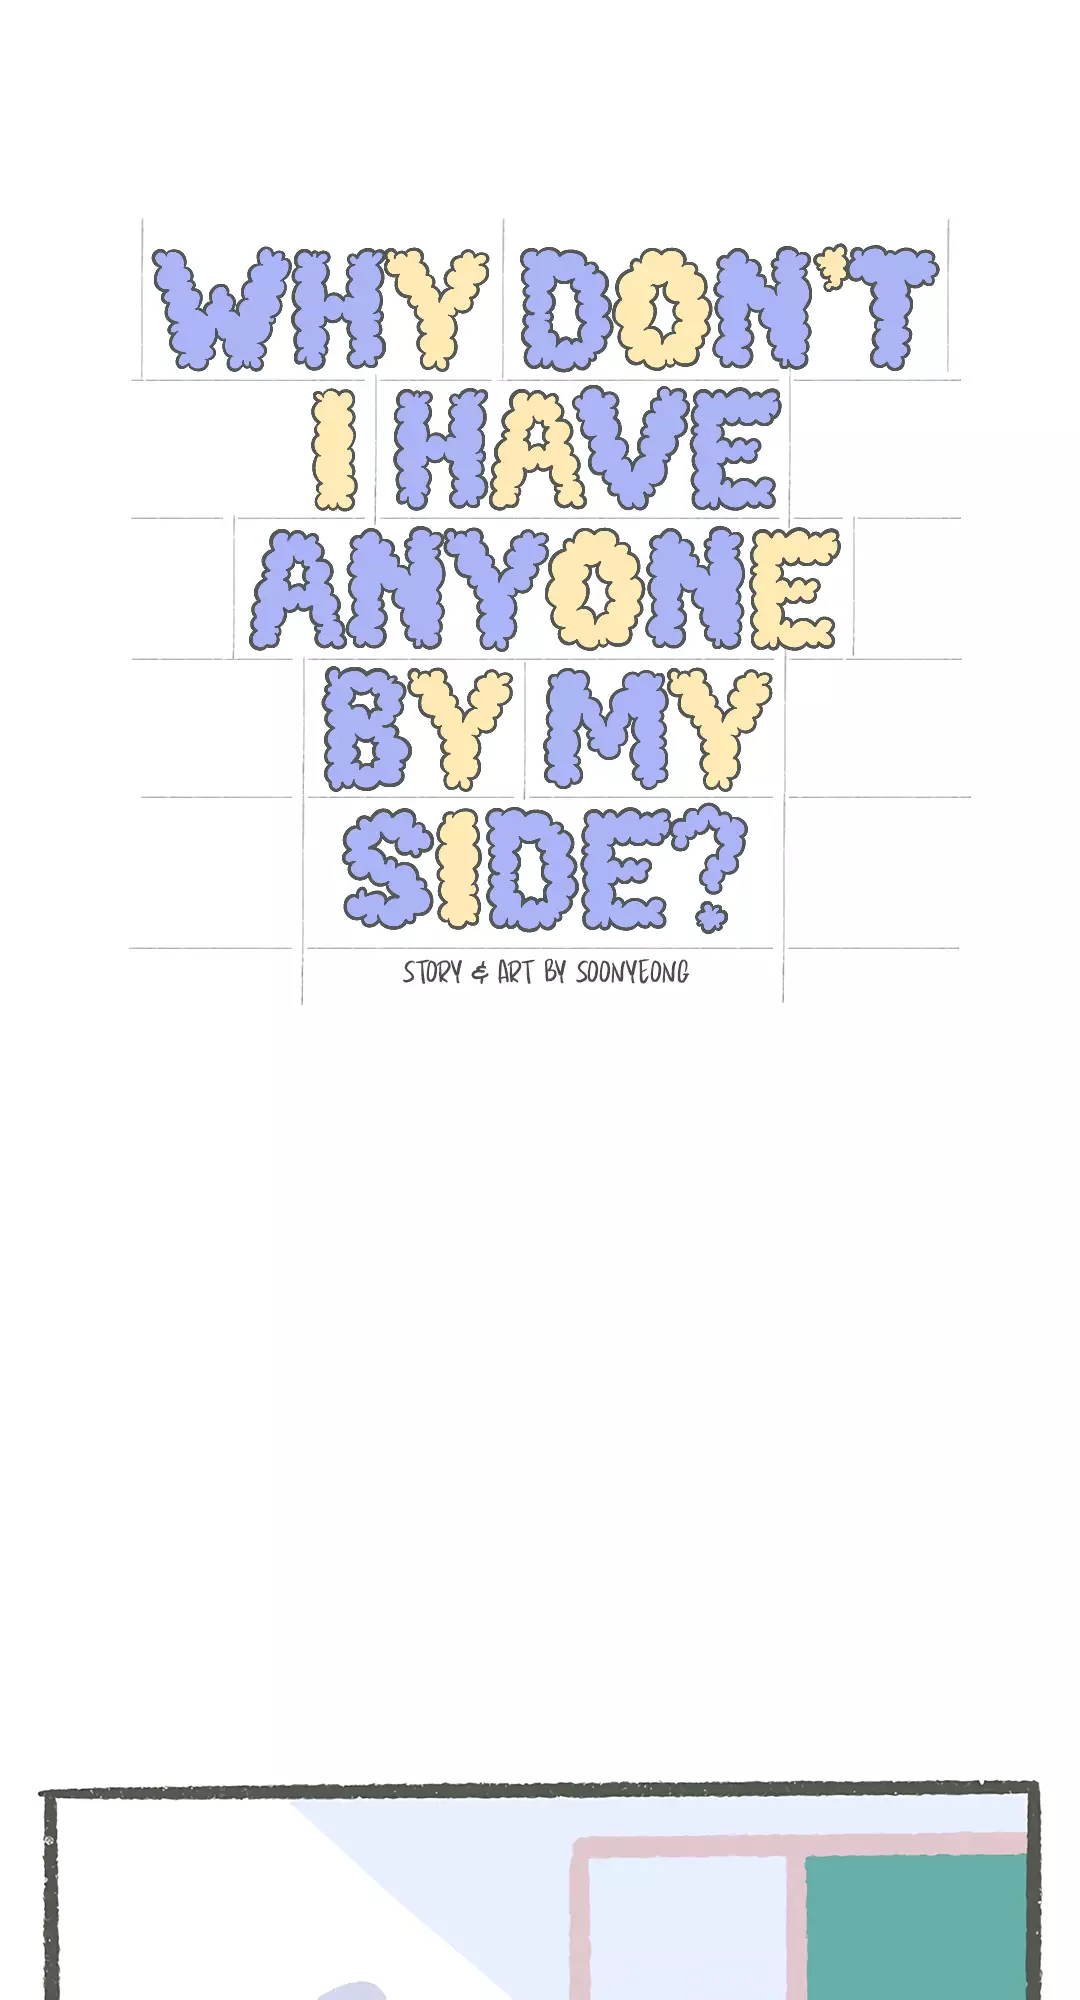 Why Don't I Have Anyone By My Side? - 14 page 10-92c20c4d